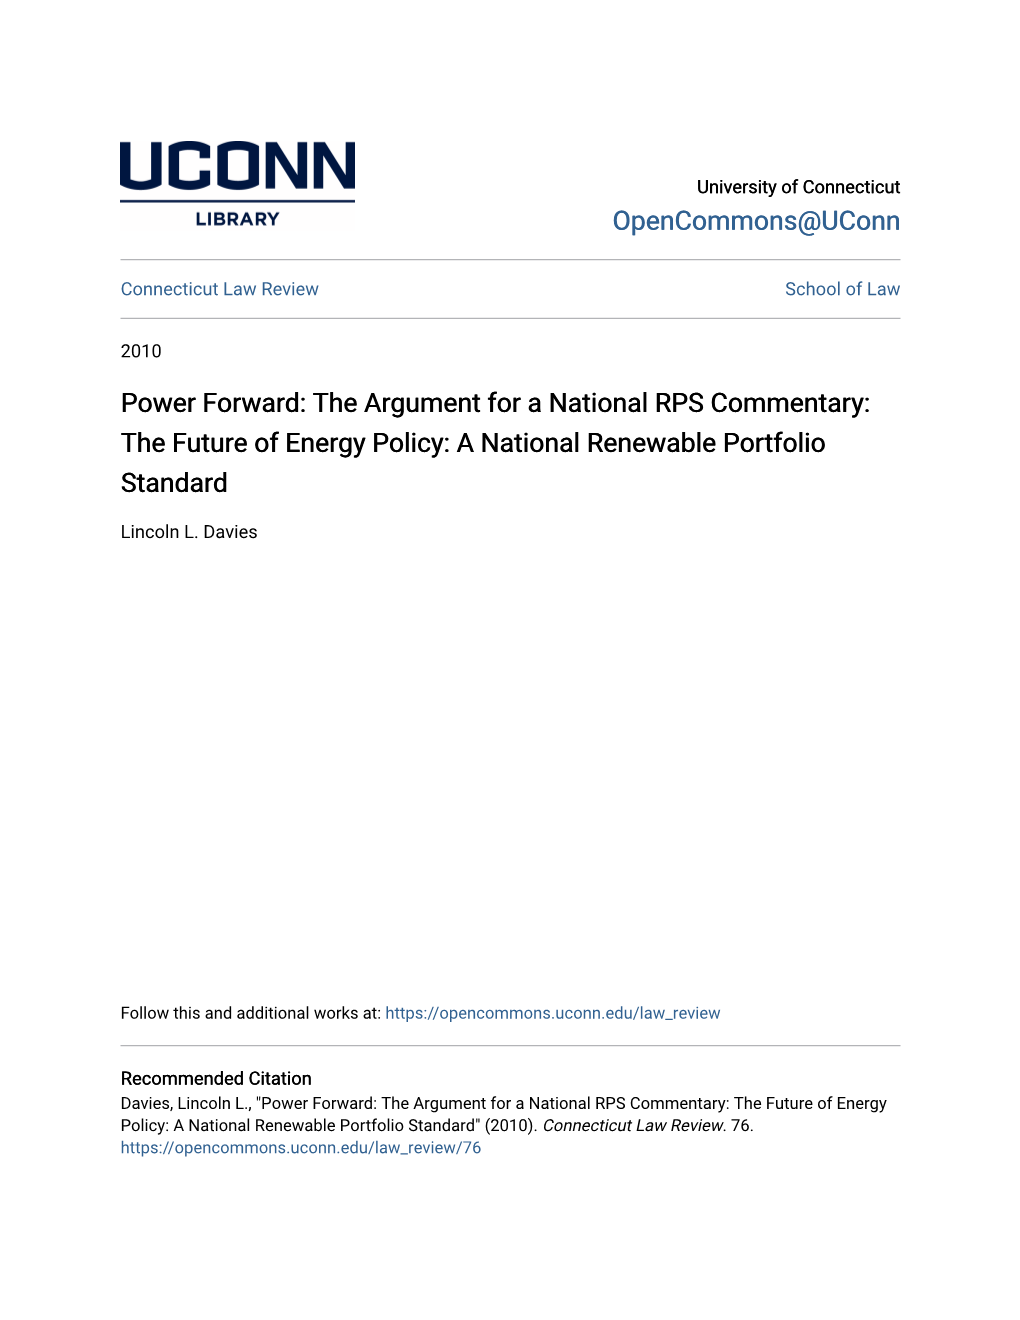 The Argument for a National RPS Commentary: the Future of Energy Policy: a National Renewable Portfolio Standard